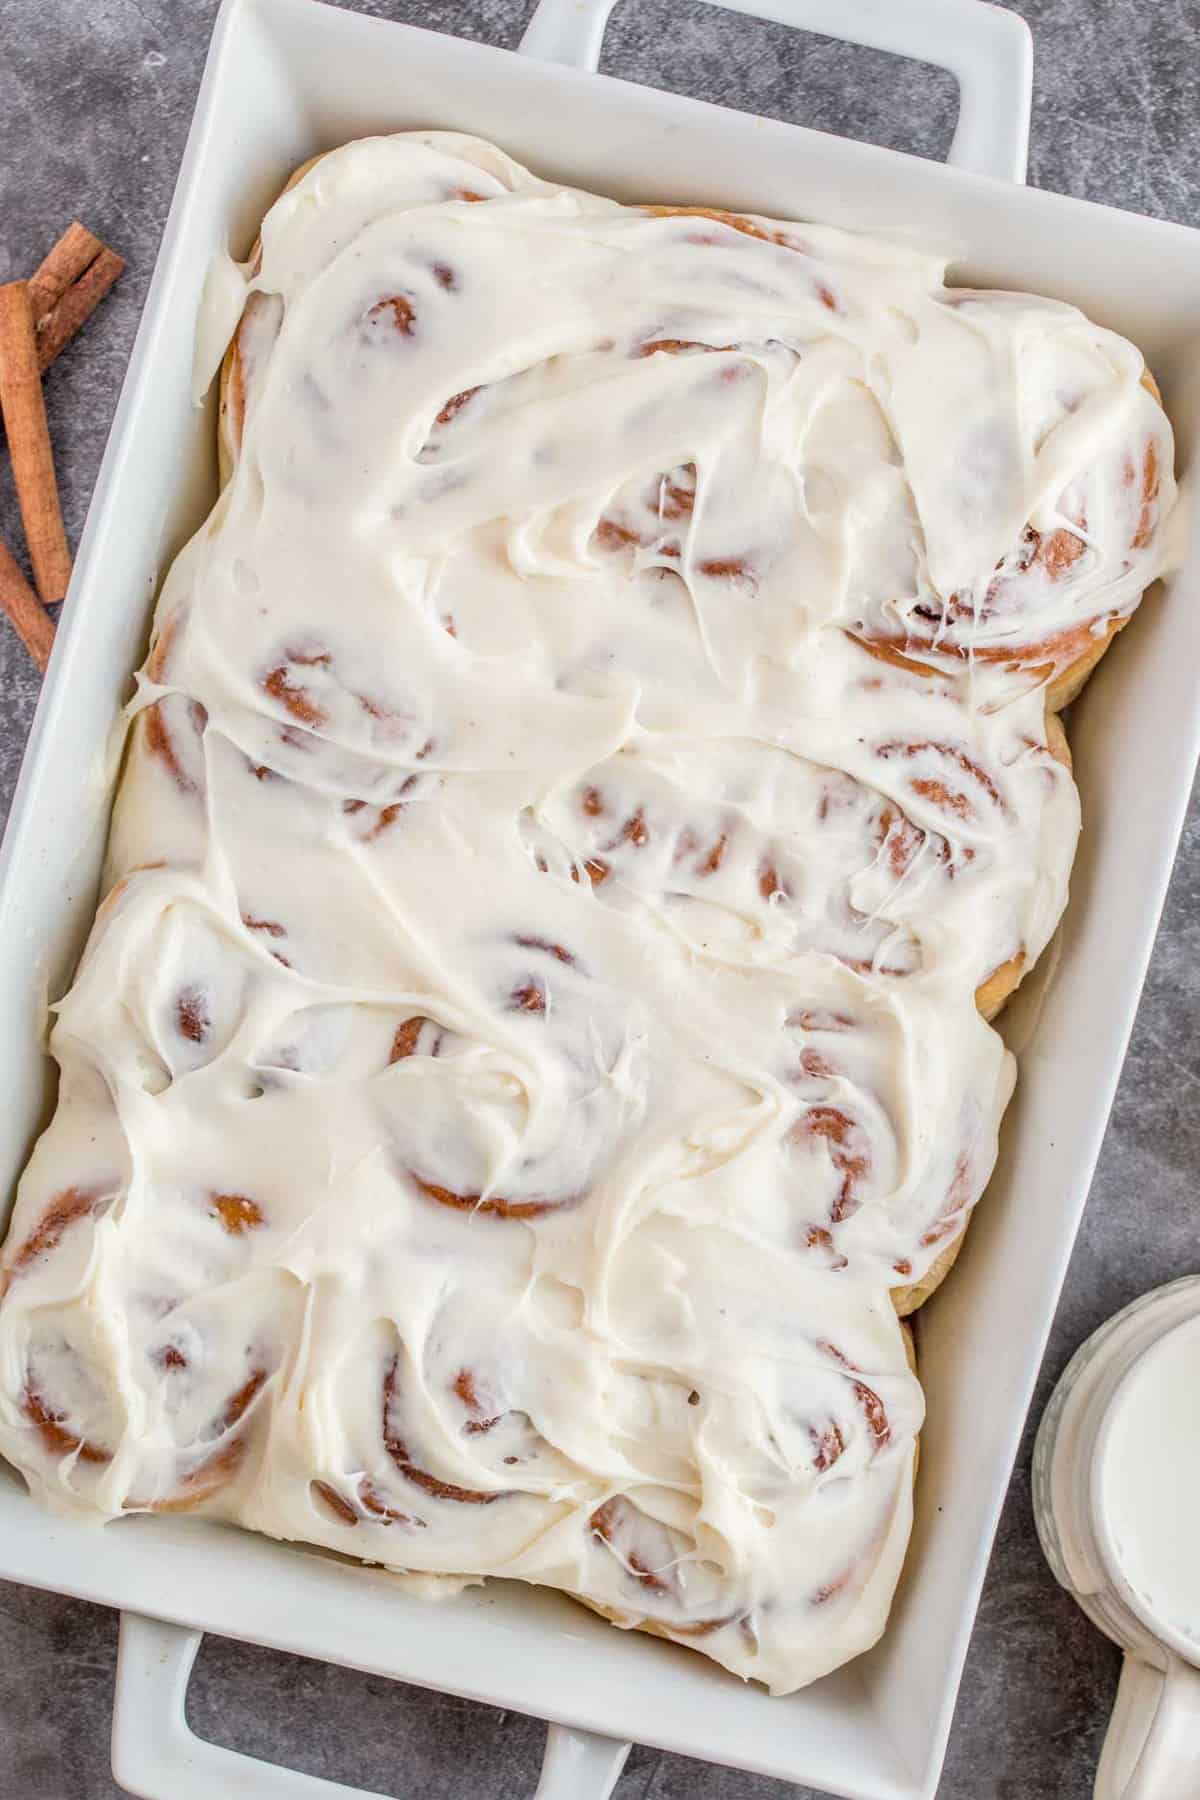 A casserole dish loaded with sweet cinnamon rolls topped with cream cheese frosting.